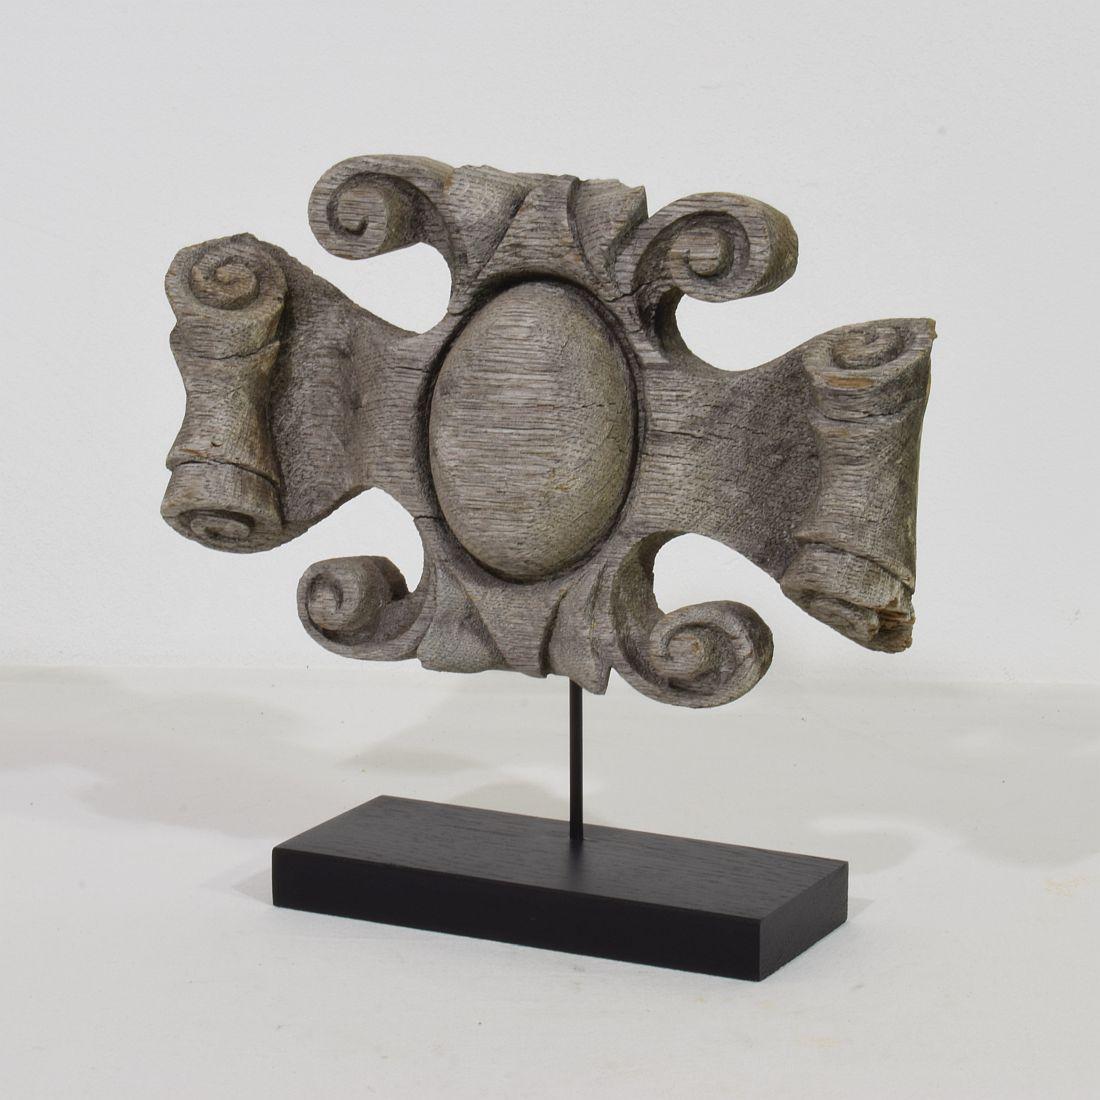 French 19th century weathered oak ornament.
France, circa 1850
measurements include the wooden base.